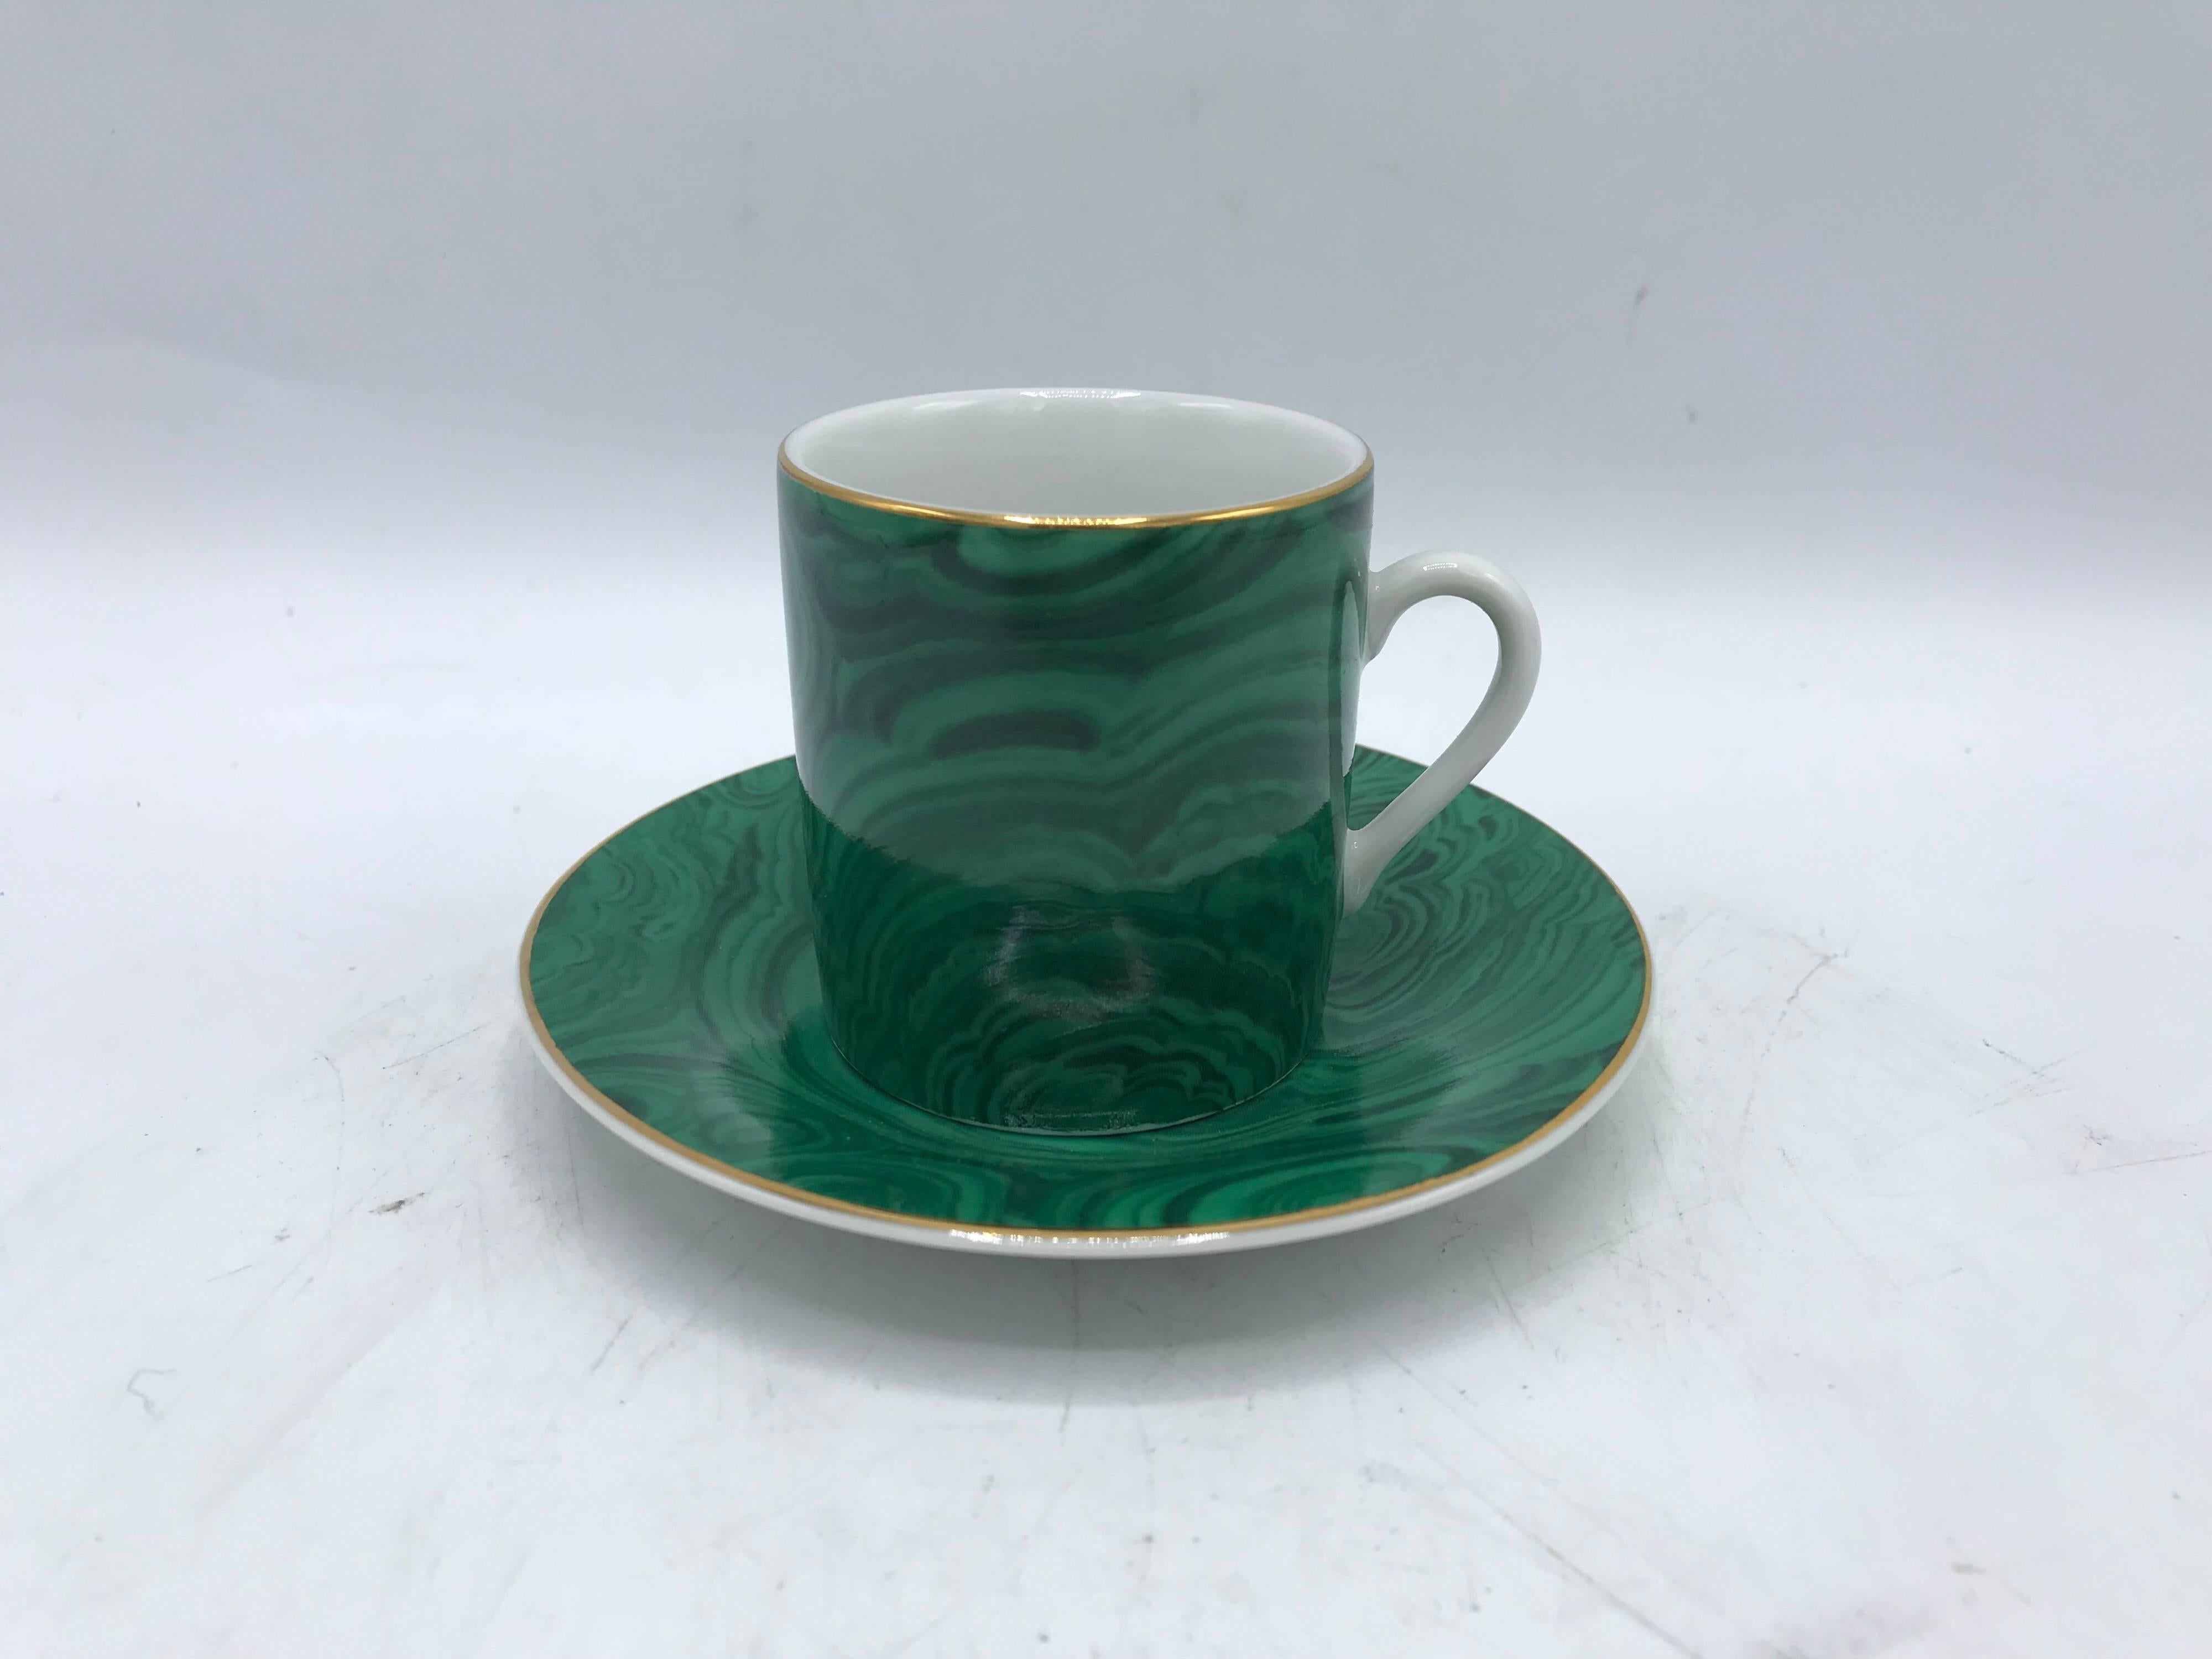 Hollywood Regency 1980s Neiman Marcus Malachite Porcelain Teacups and Saucers, Set of Eight